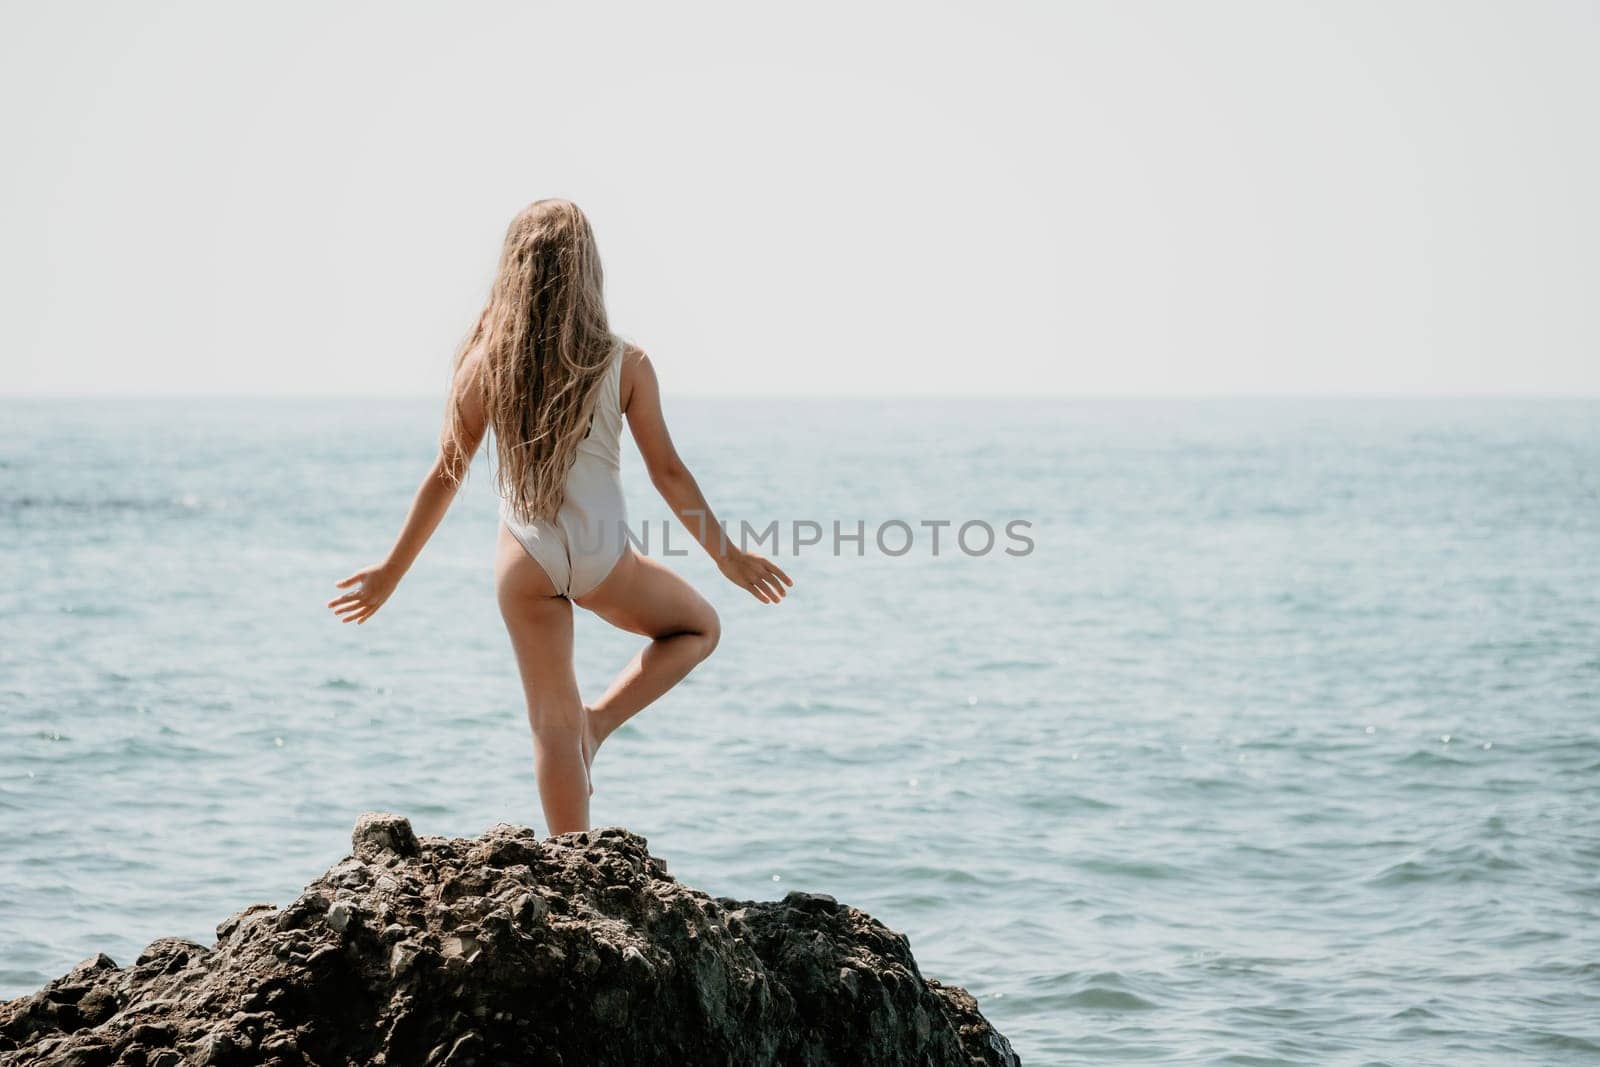 Woman and her daughter practicing balancing yoga pose on one leg up together on rock in the sea. Silhouette mother and daughter doing yoga at beach by panophotograph